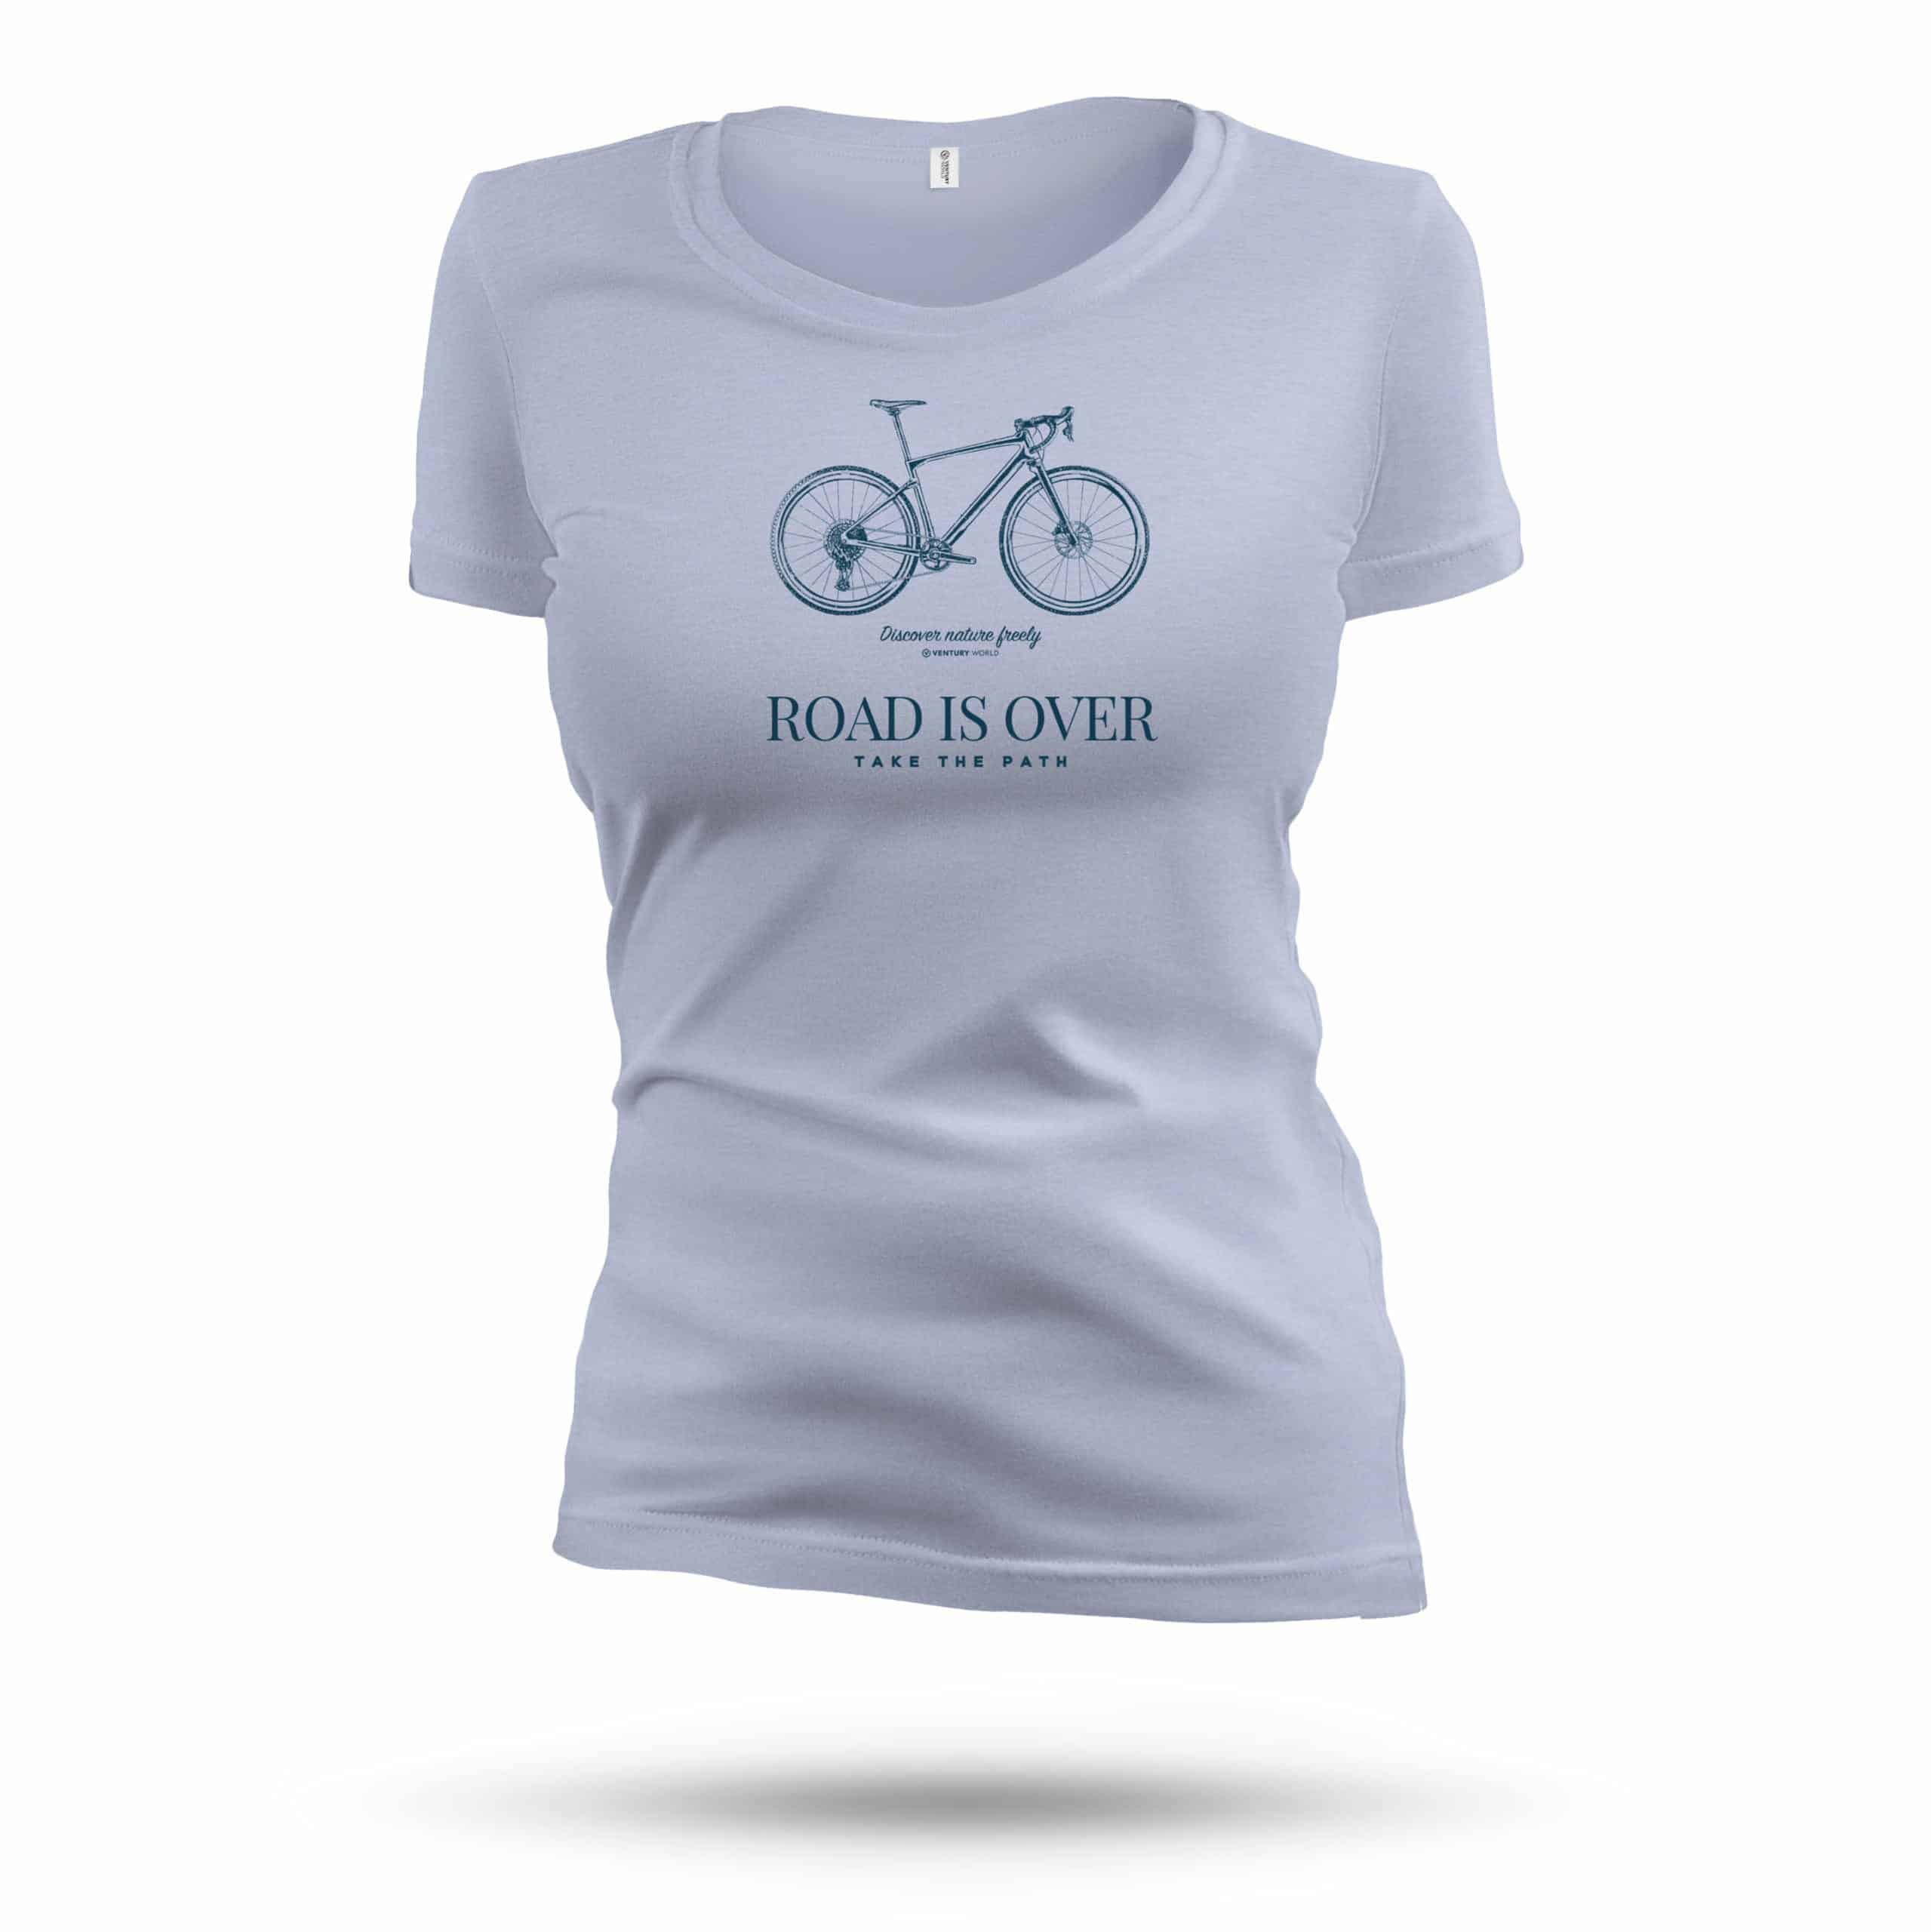 Women's cycling t-shirt - Gravel Bike - Ride on all paths freely - 100% natural women's t-shirt in high quality - fitted size large round neck.